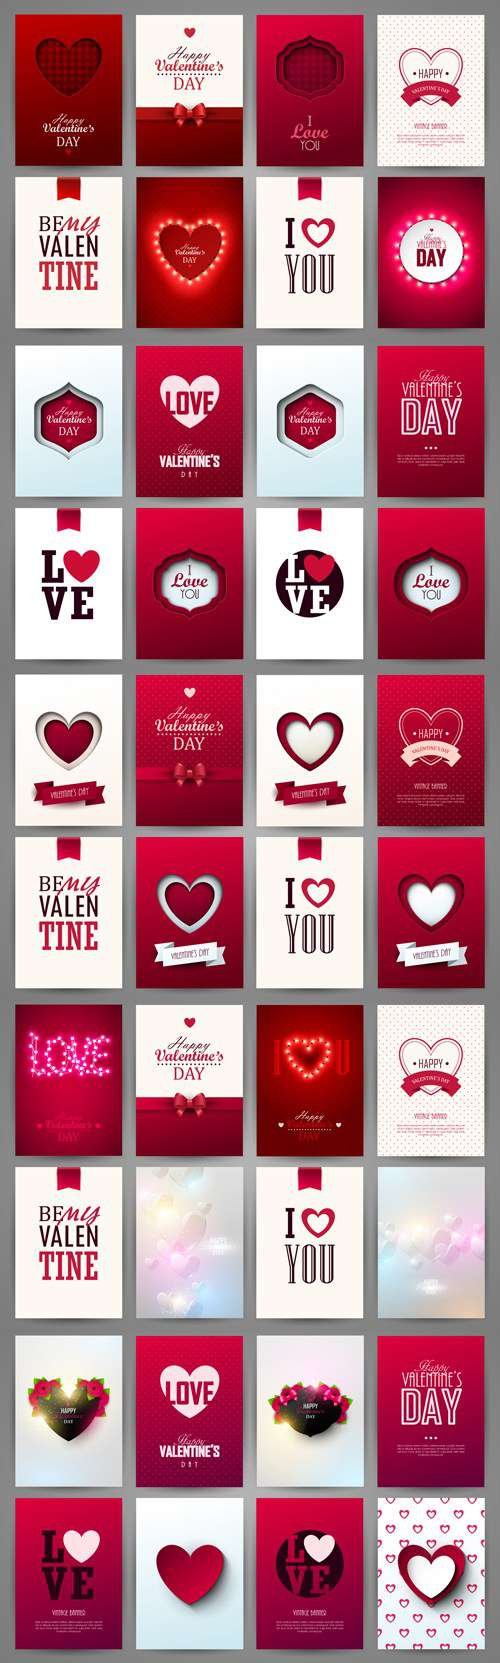 Valentine's Day 2016 Cards Vector